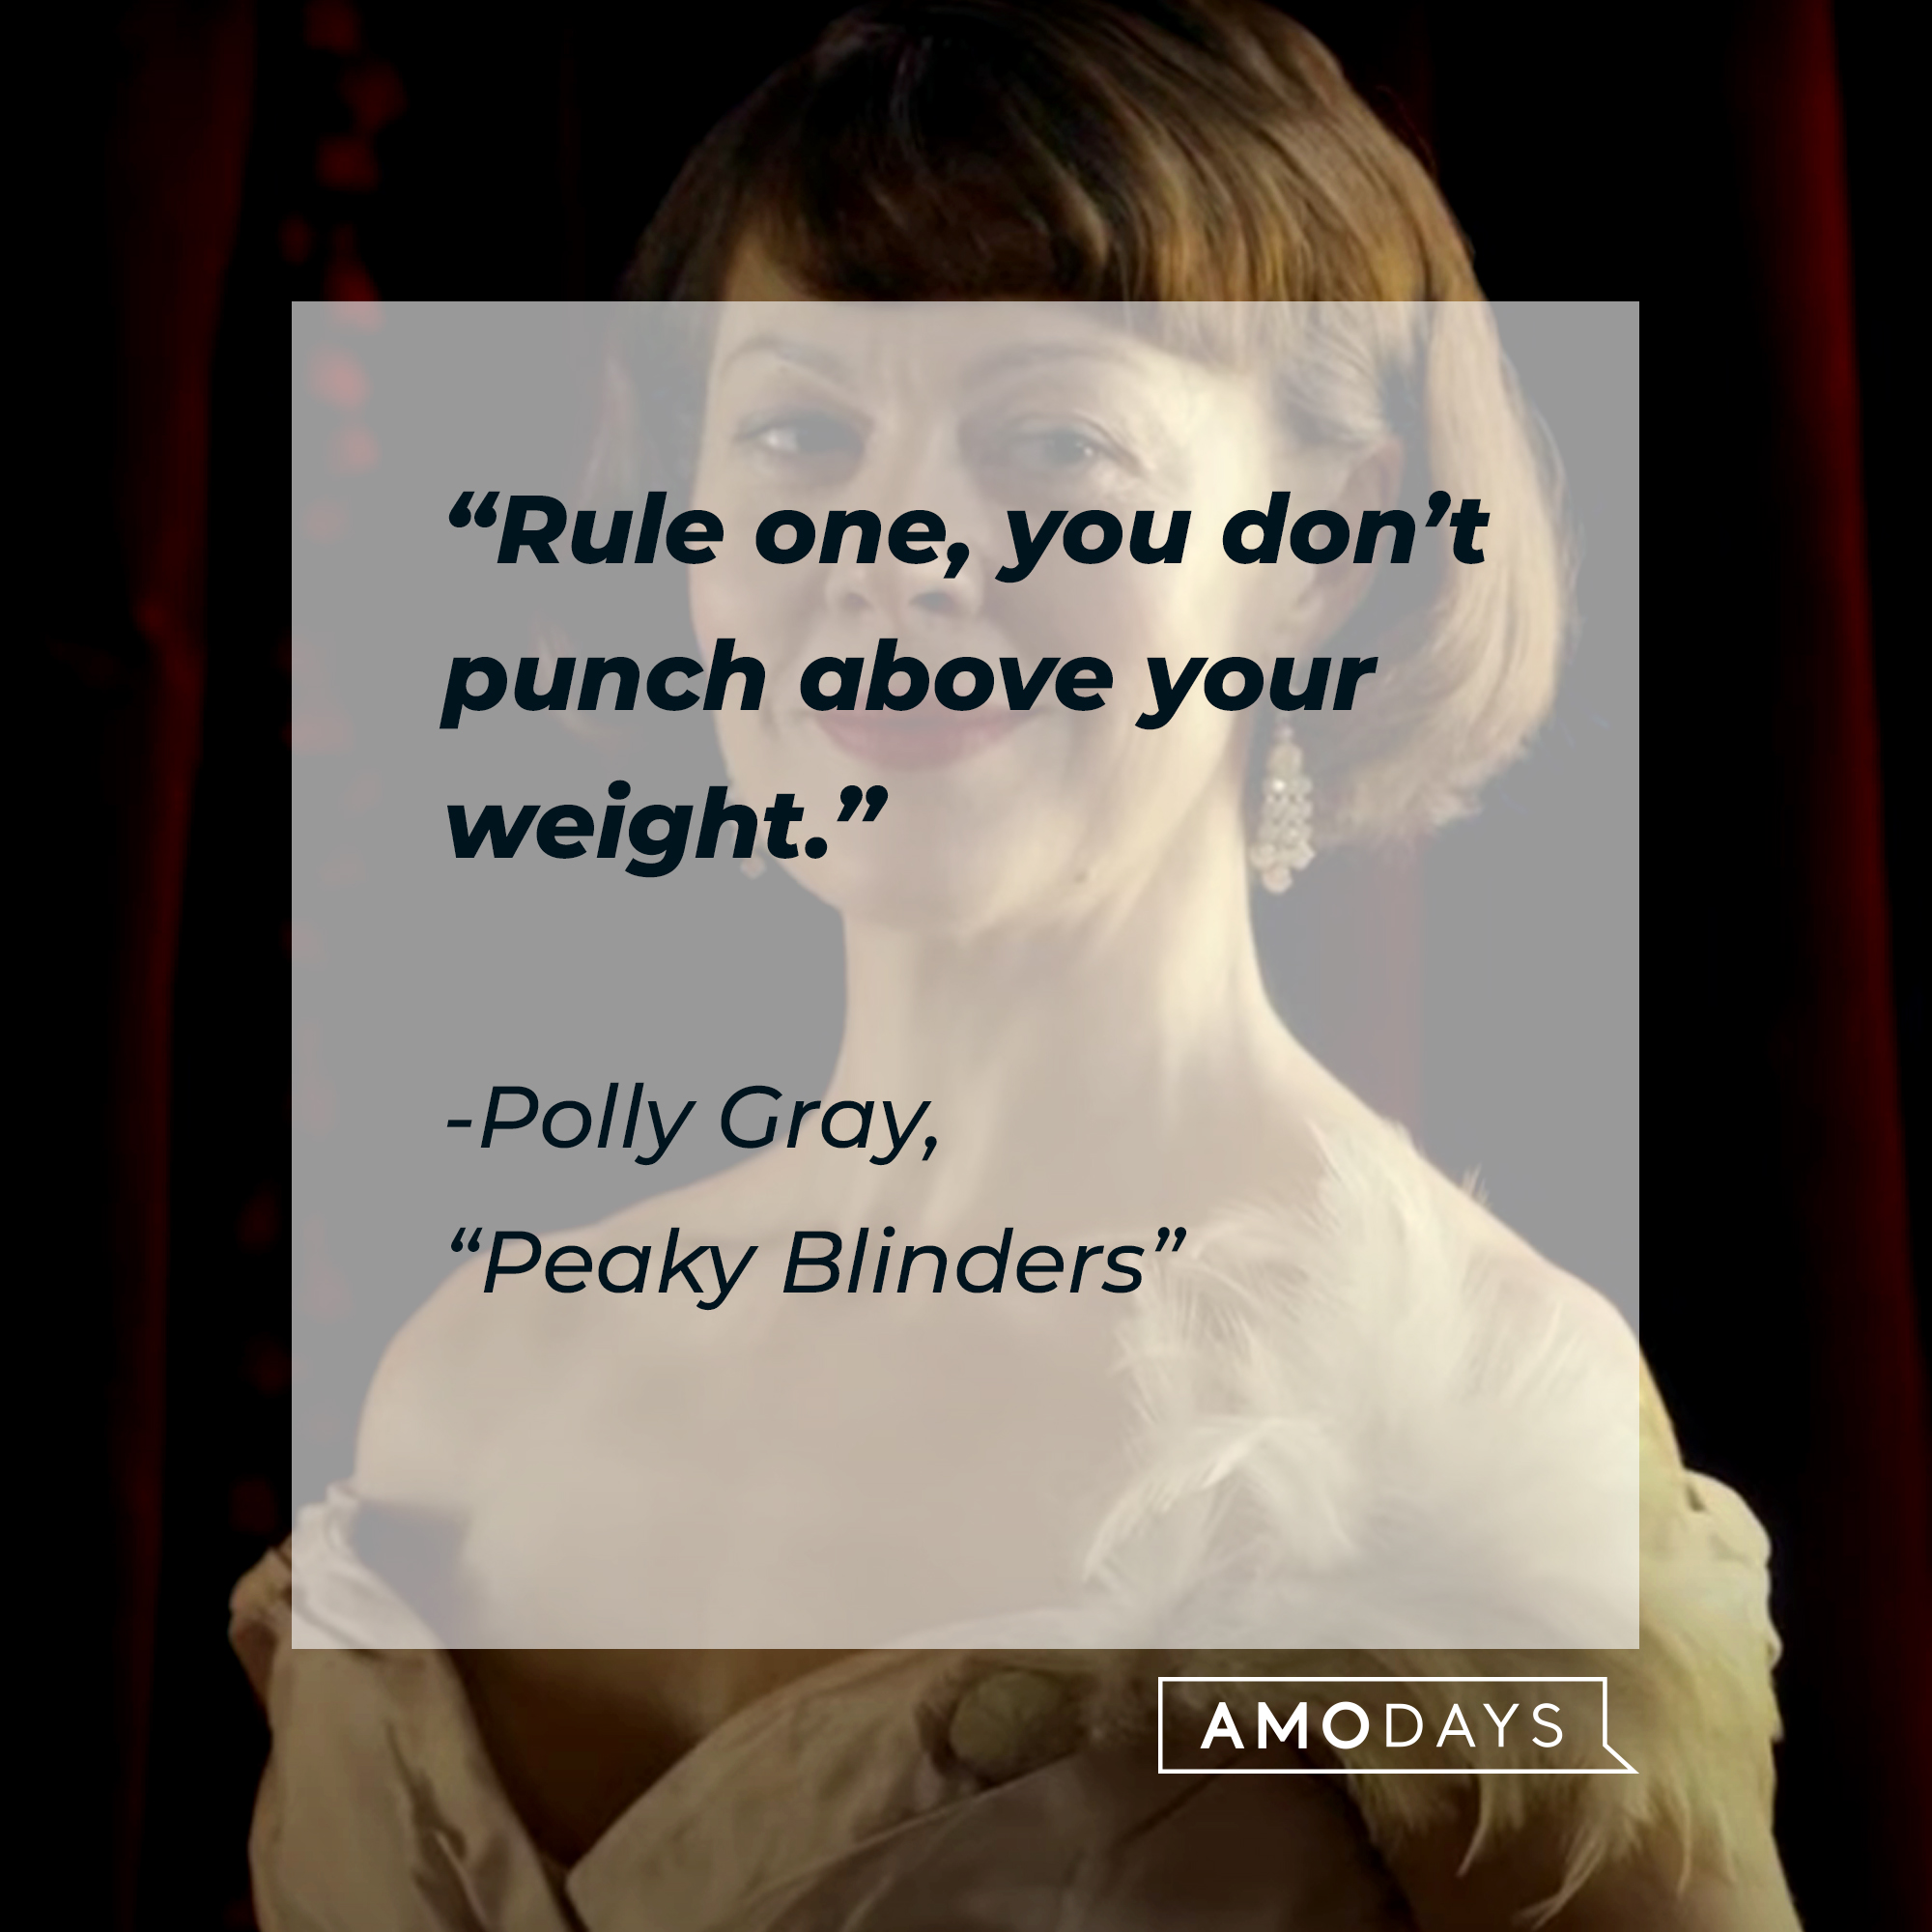 Polly Gray’s quote from “Peaky Blinders”: “Rule one, you don’t punch above your weight.” | Source: Youtube.com/BBC